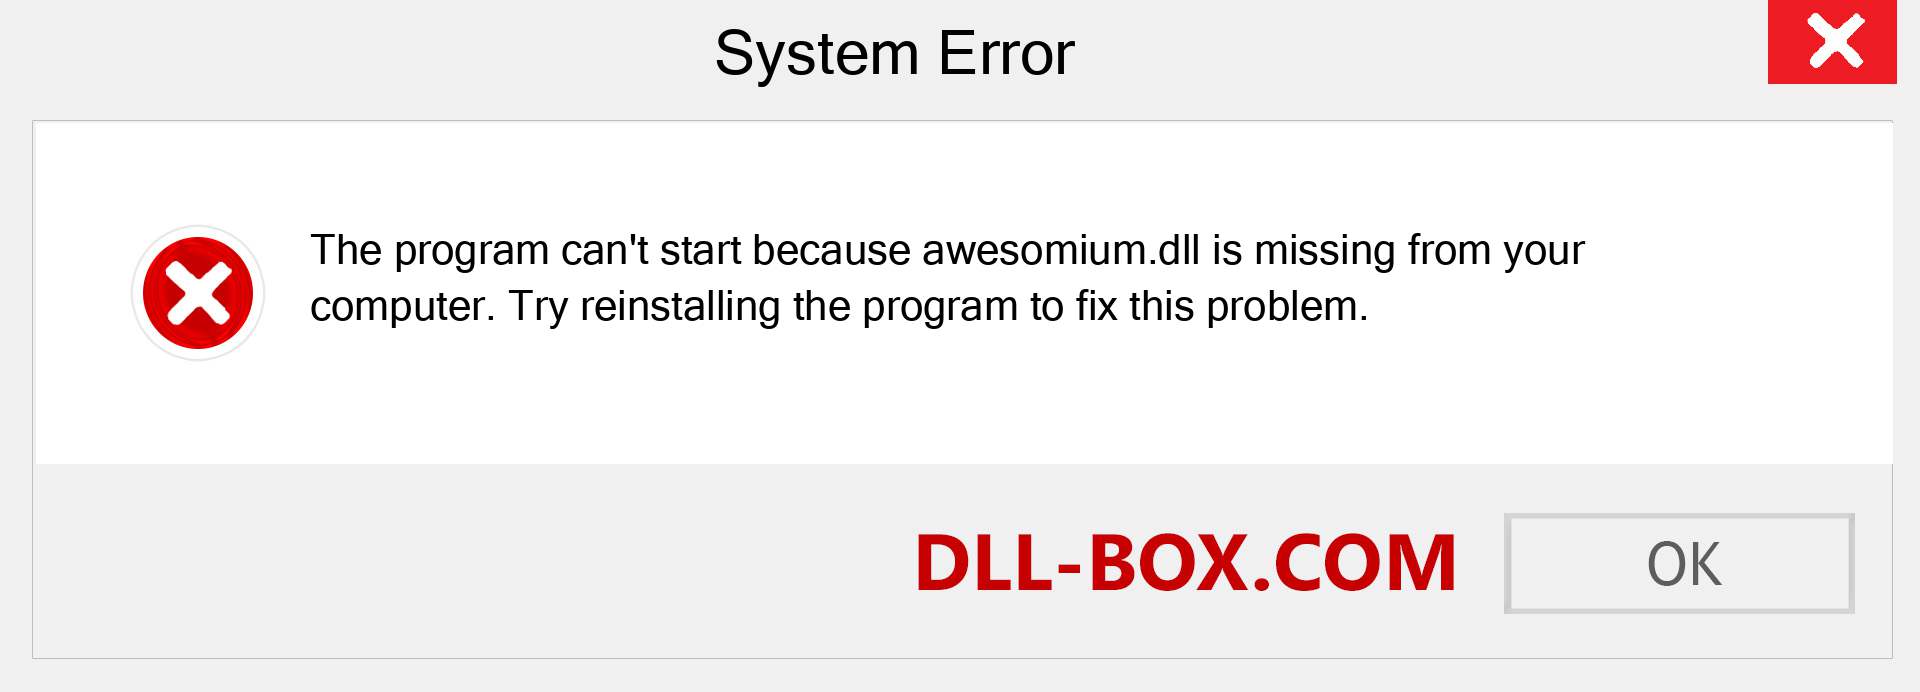  awesomium.dll file is missing?. Download for Windows 7, 8, 10 - Fix  awesomium dll Missing Error on Windows, photos, images